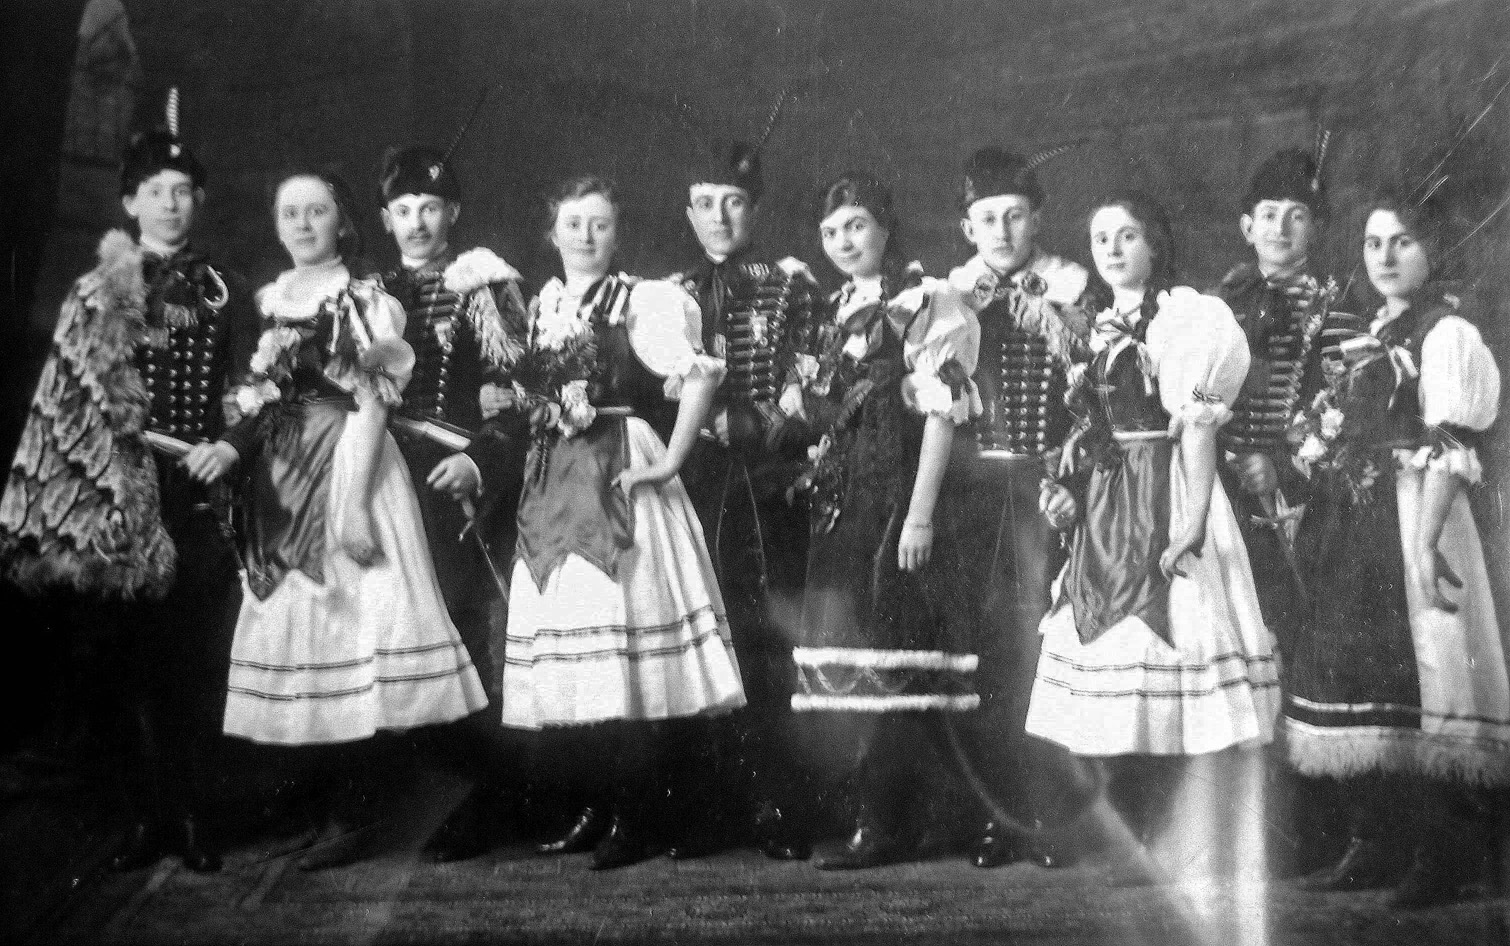 My paternal grandfather's family (three brothers, three sisters) emigrated from Hungary about the turn of the century and settled in the predominantly Hungarian-Jewish Logan section of Philadelphia. Some of them were photographed at some sort of costume event.  

I think that males number 1, 2, 3 and 5 from the left were my grandfather Nelson Blass (1884-1952), uncle Eugene Blass (1890-1953), uncle Rudy Polya (1889-1987) and uncle Armin Braun (1890-1957). The only female whom I recognize is [middle] aunt Sara Blass Polya (1888-1973).  View full size.

